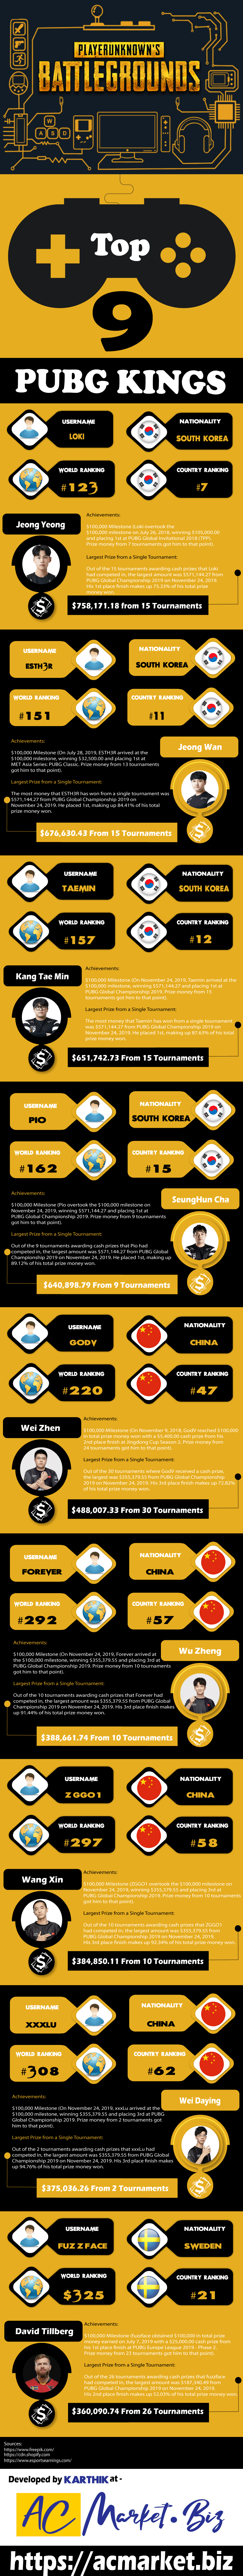 Top 9 PUBG kings #infographic